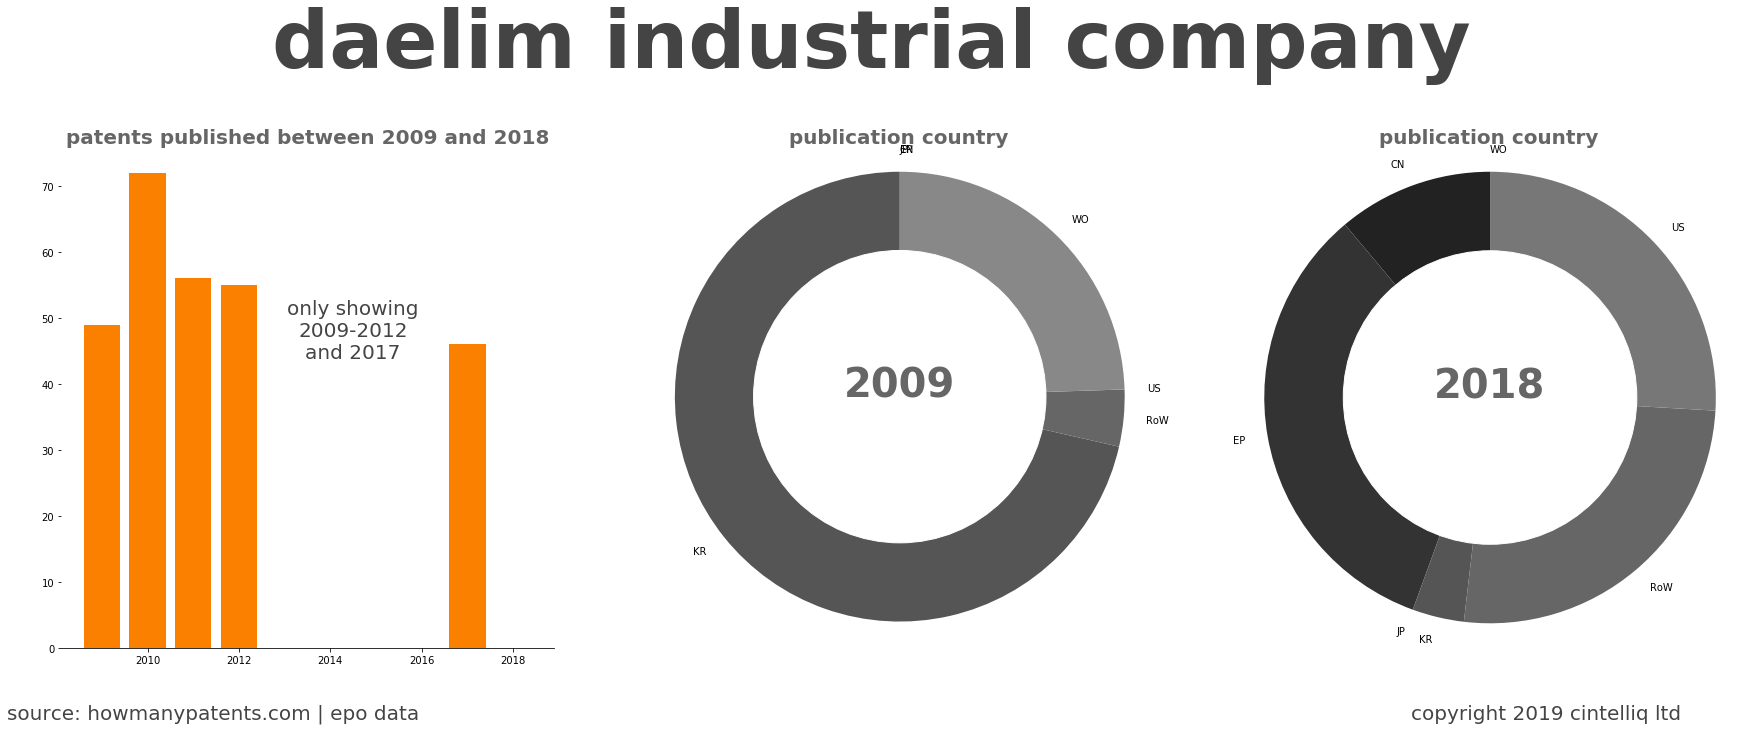 summary of patents for Daelim Industrial Company